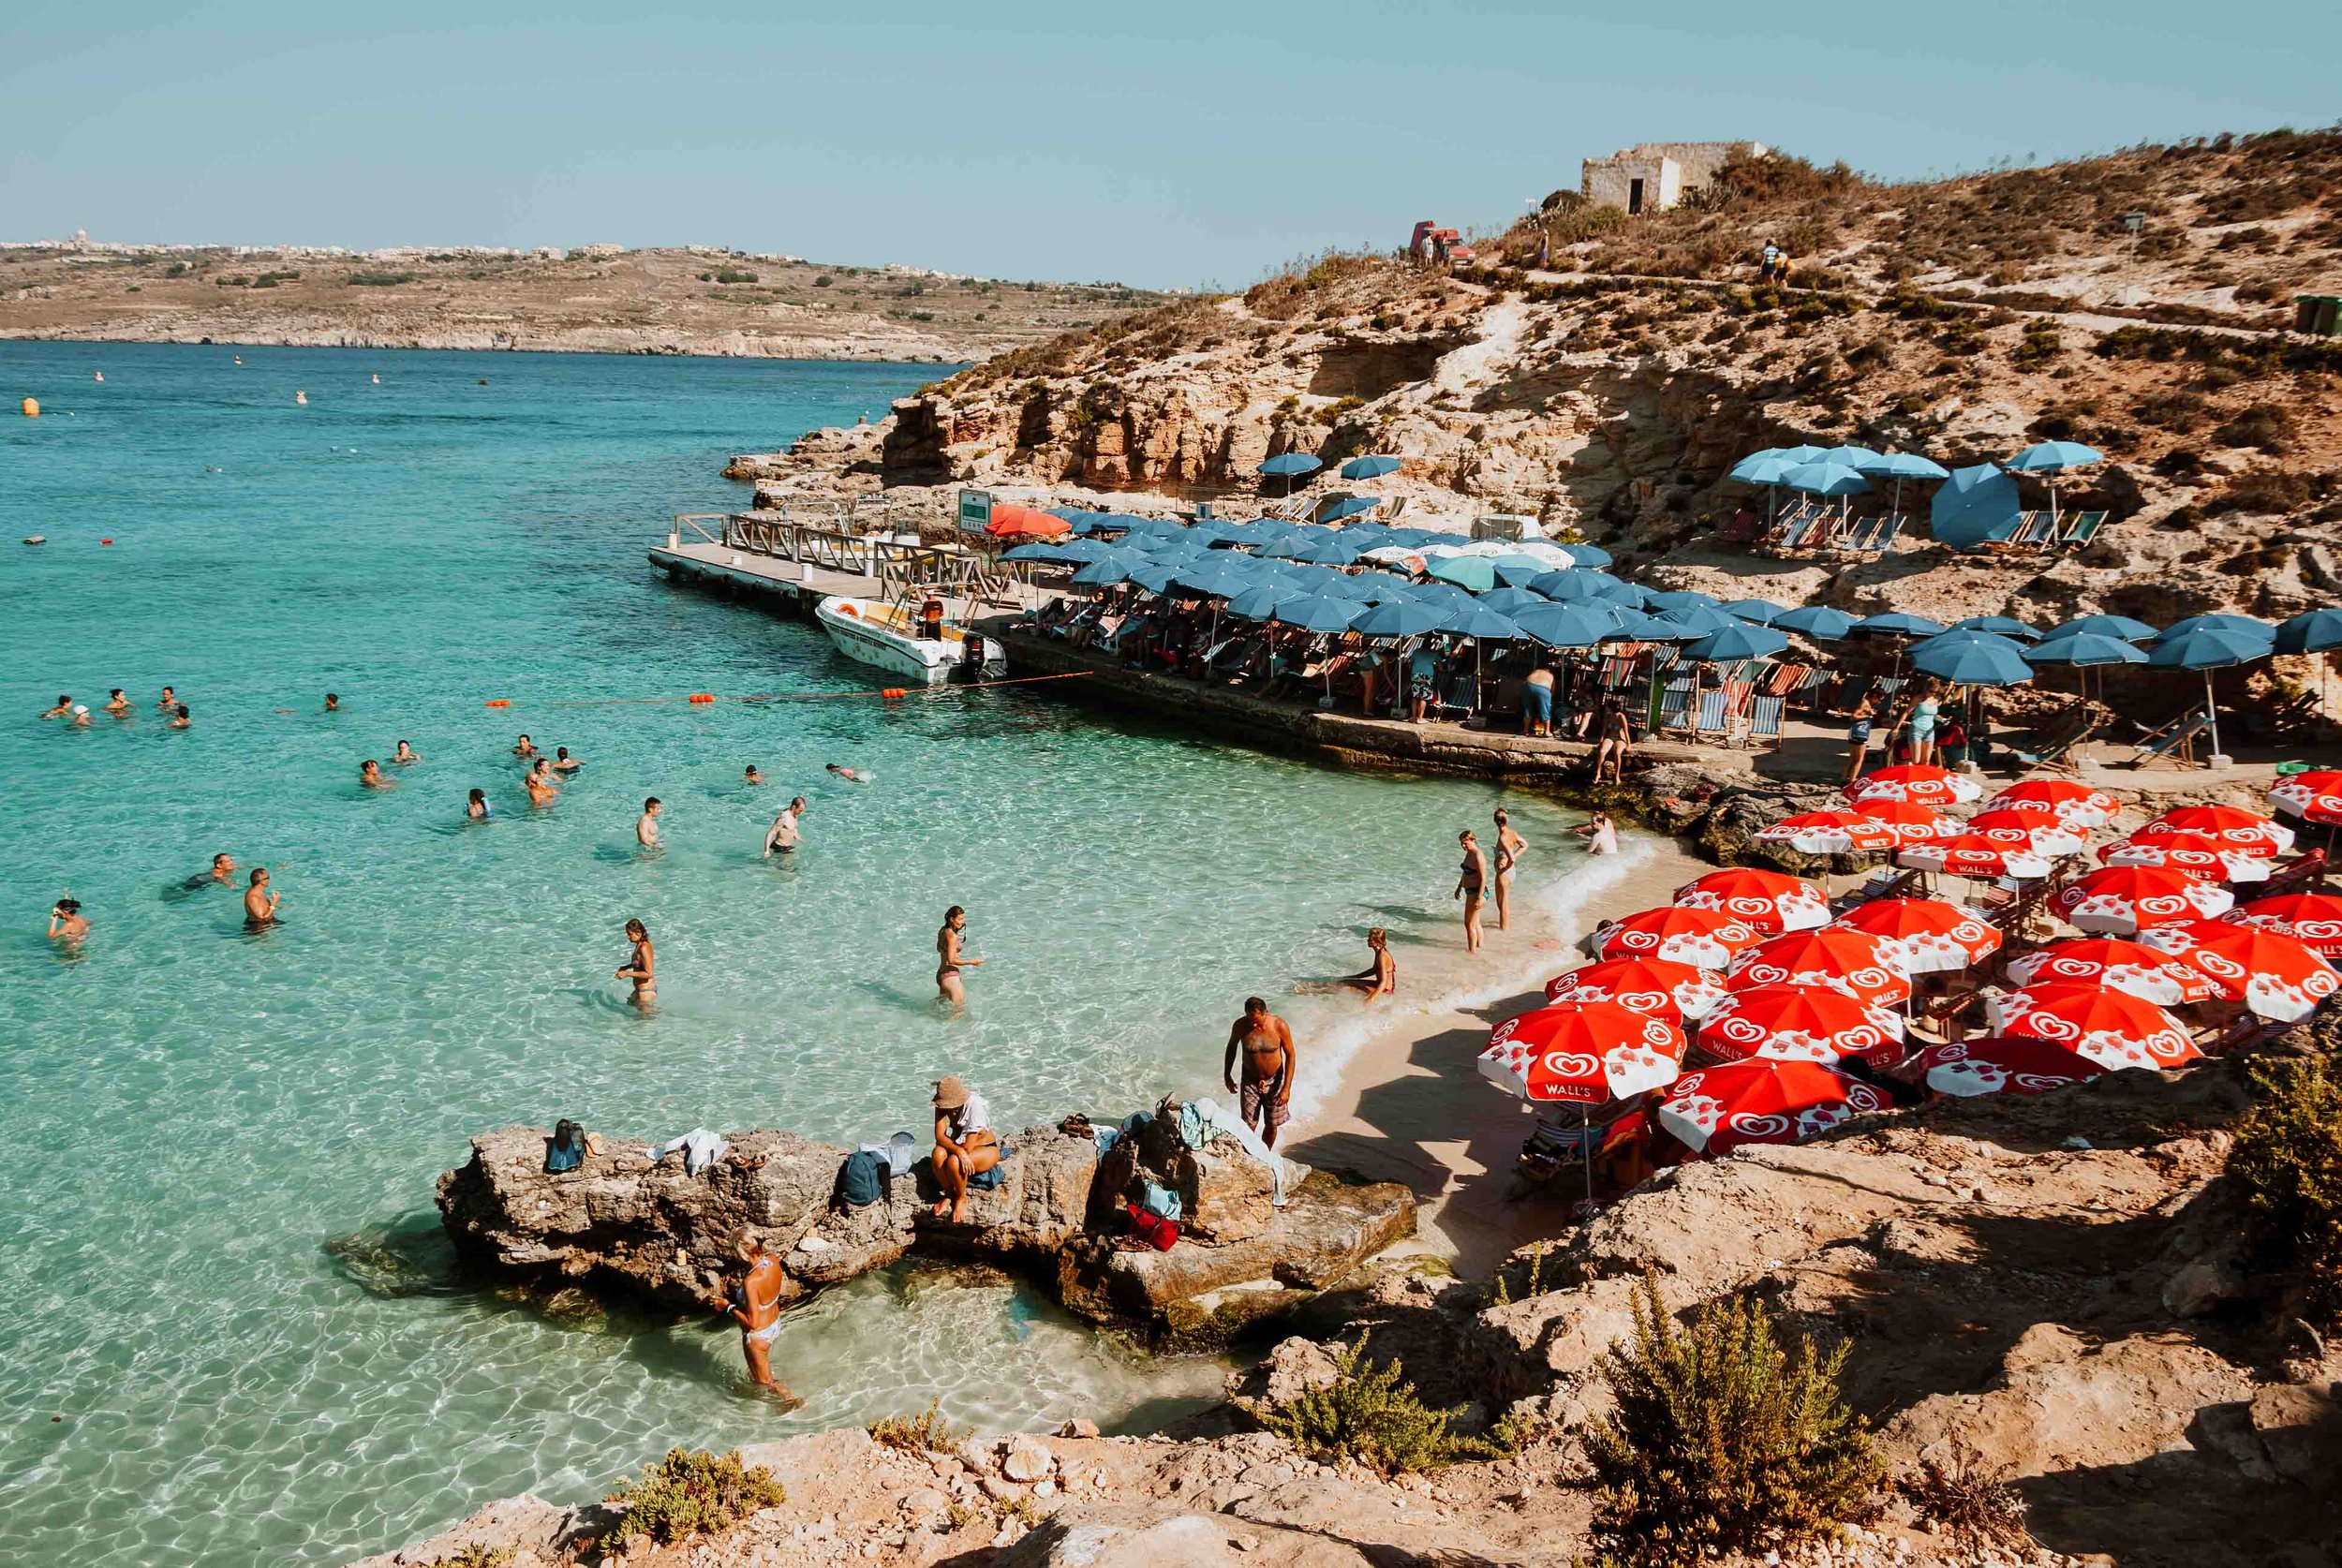 People swimming on the beach in Blue Lagoon Malta one of the Warmest places in Europe in April